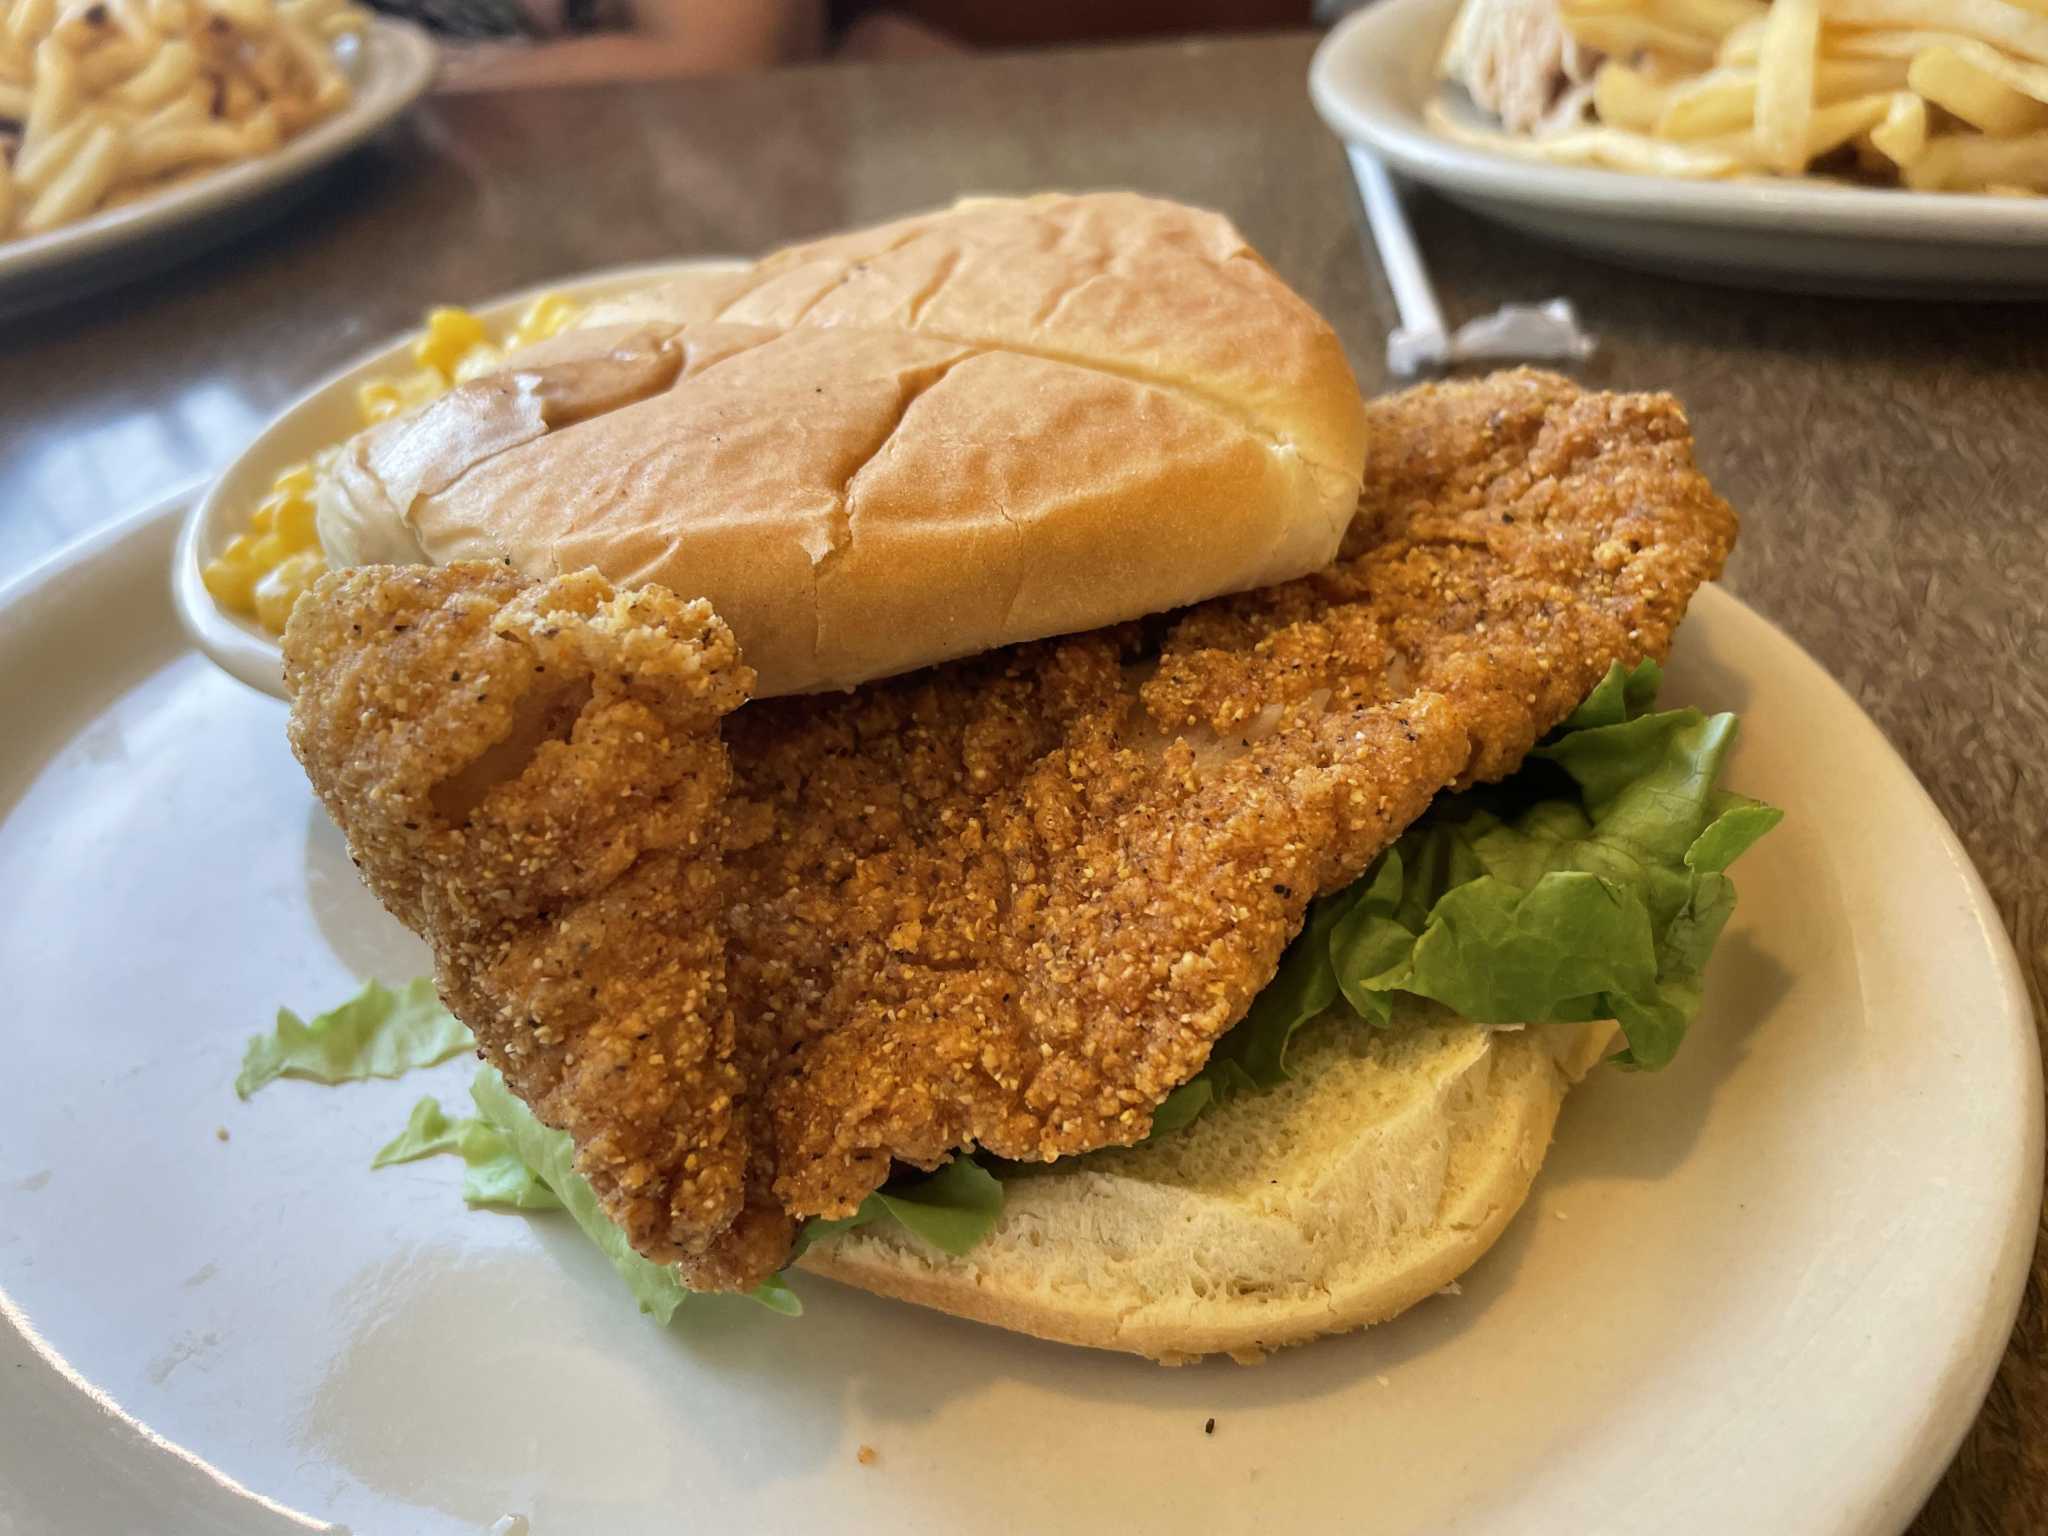 Jim’s Eating places reels on this critic with an incredible catfish sandwich, enormous membership sammie, crispy bacon